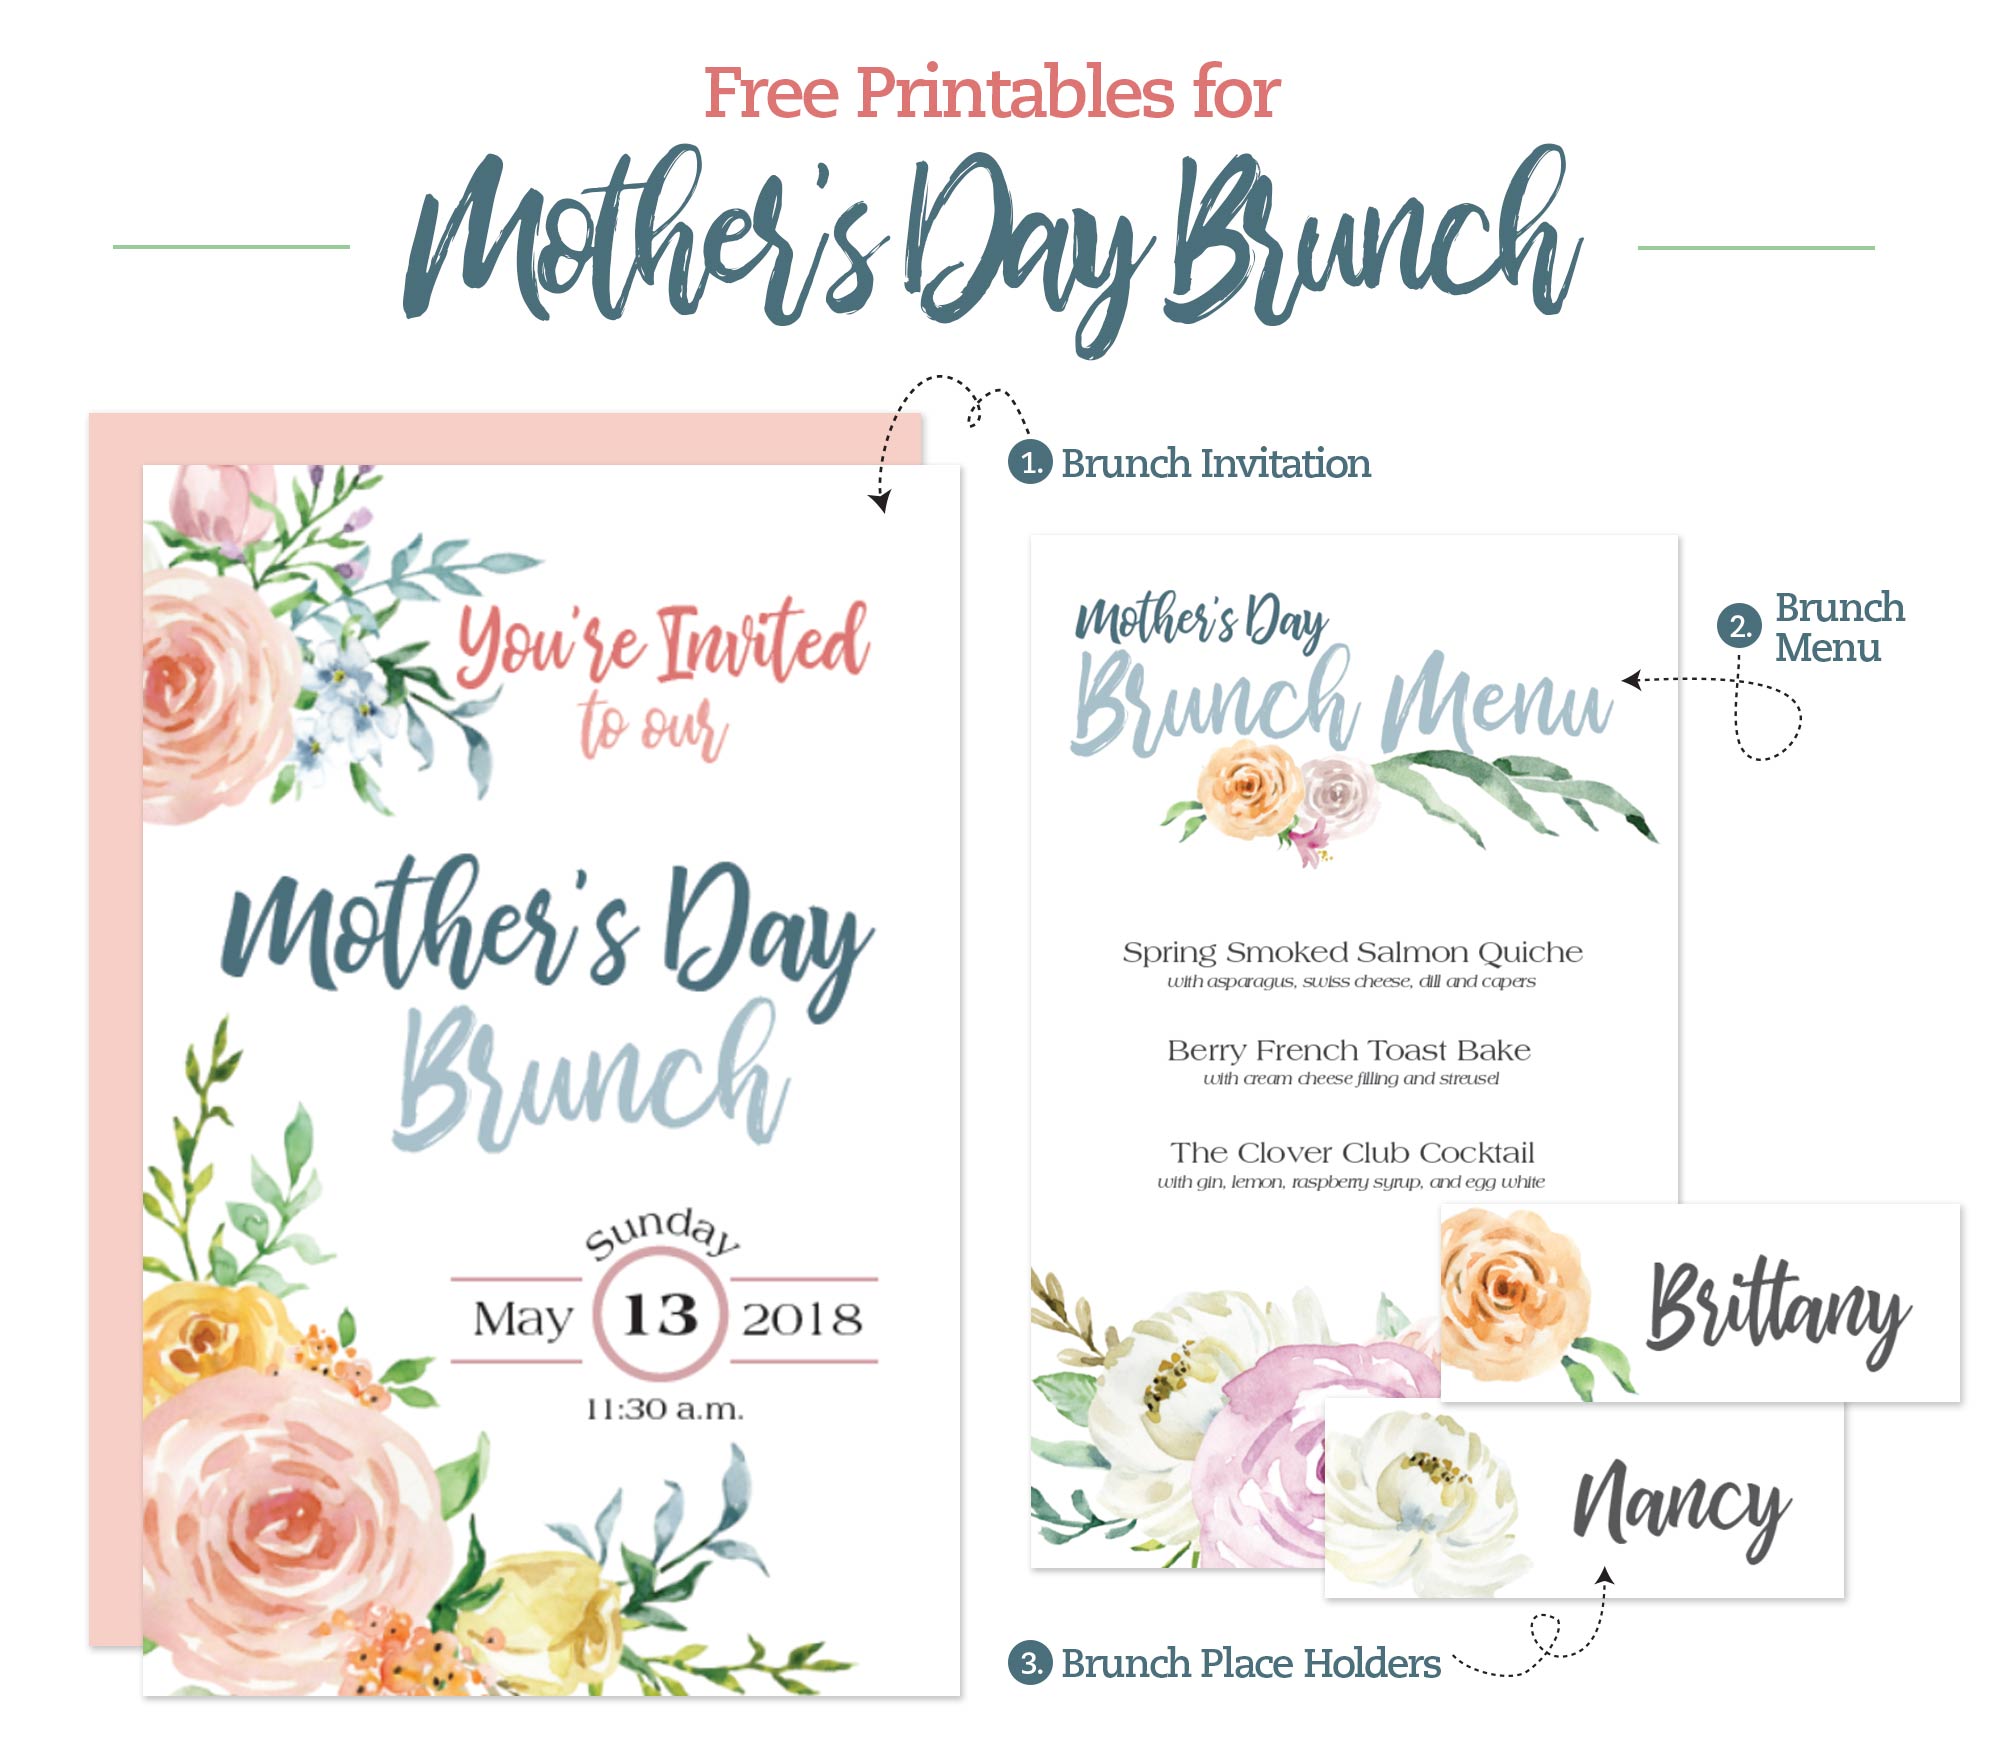 Mother's Day Brunch Printable Menu, Invitation and Place Holders